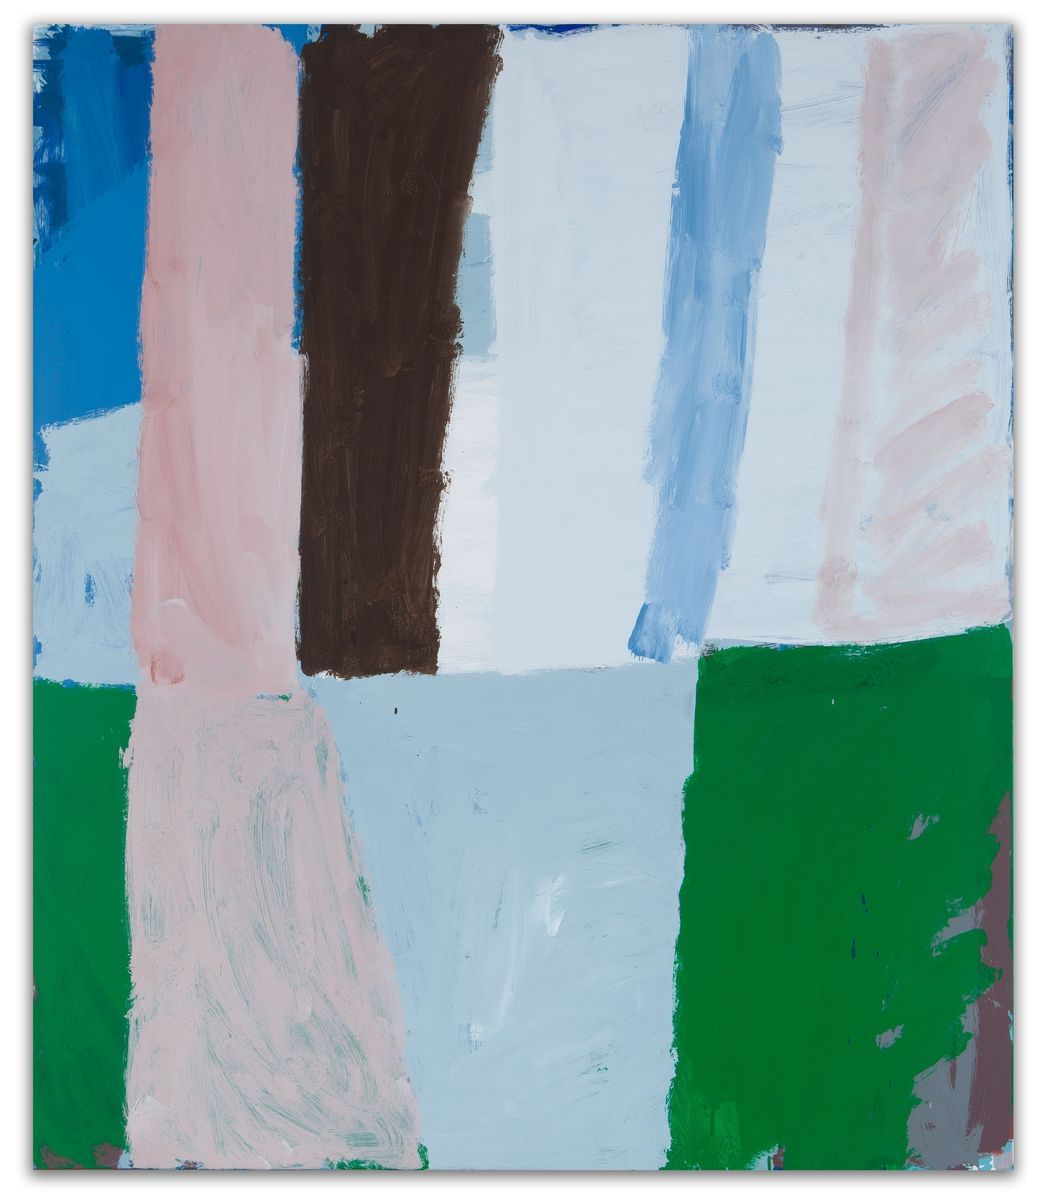 Sally Anderson - Unfolding Room, Green, Pink, Brown, Blue